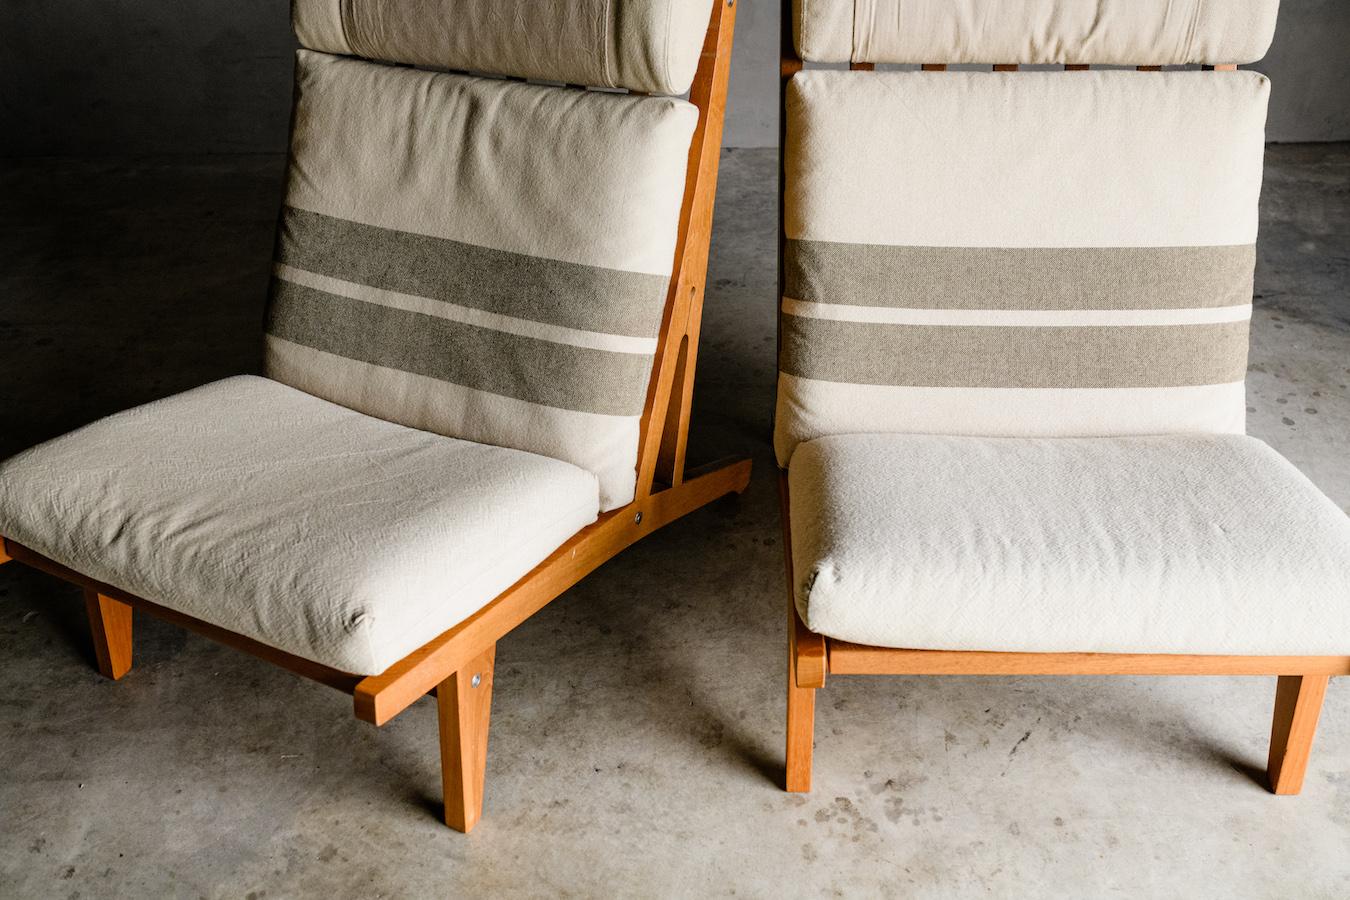 Vintage Pair of Hans Wegner Lounge Chairs from Denmark, Circa 1960 In Good Condition For Sale In Nashville, TN